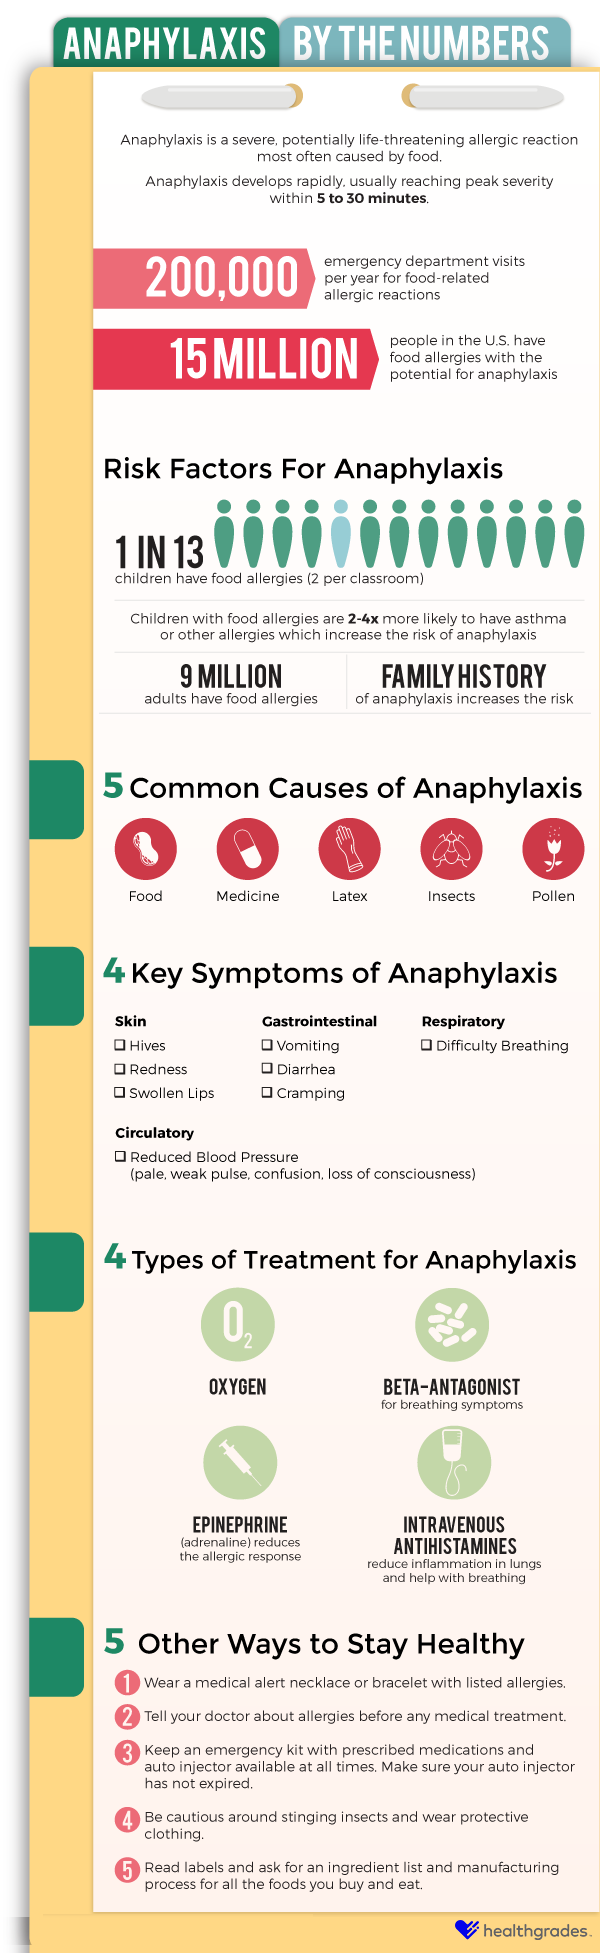 Anaphylaxis By the Numbers Infographic Image